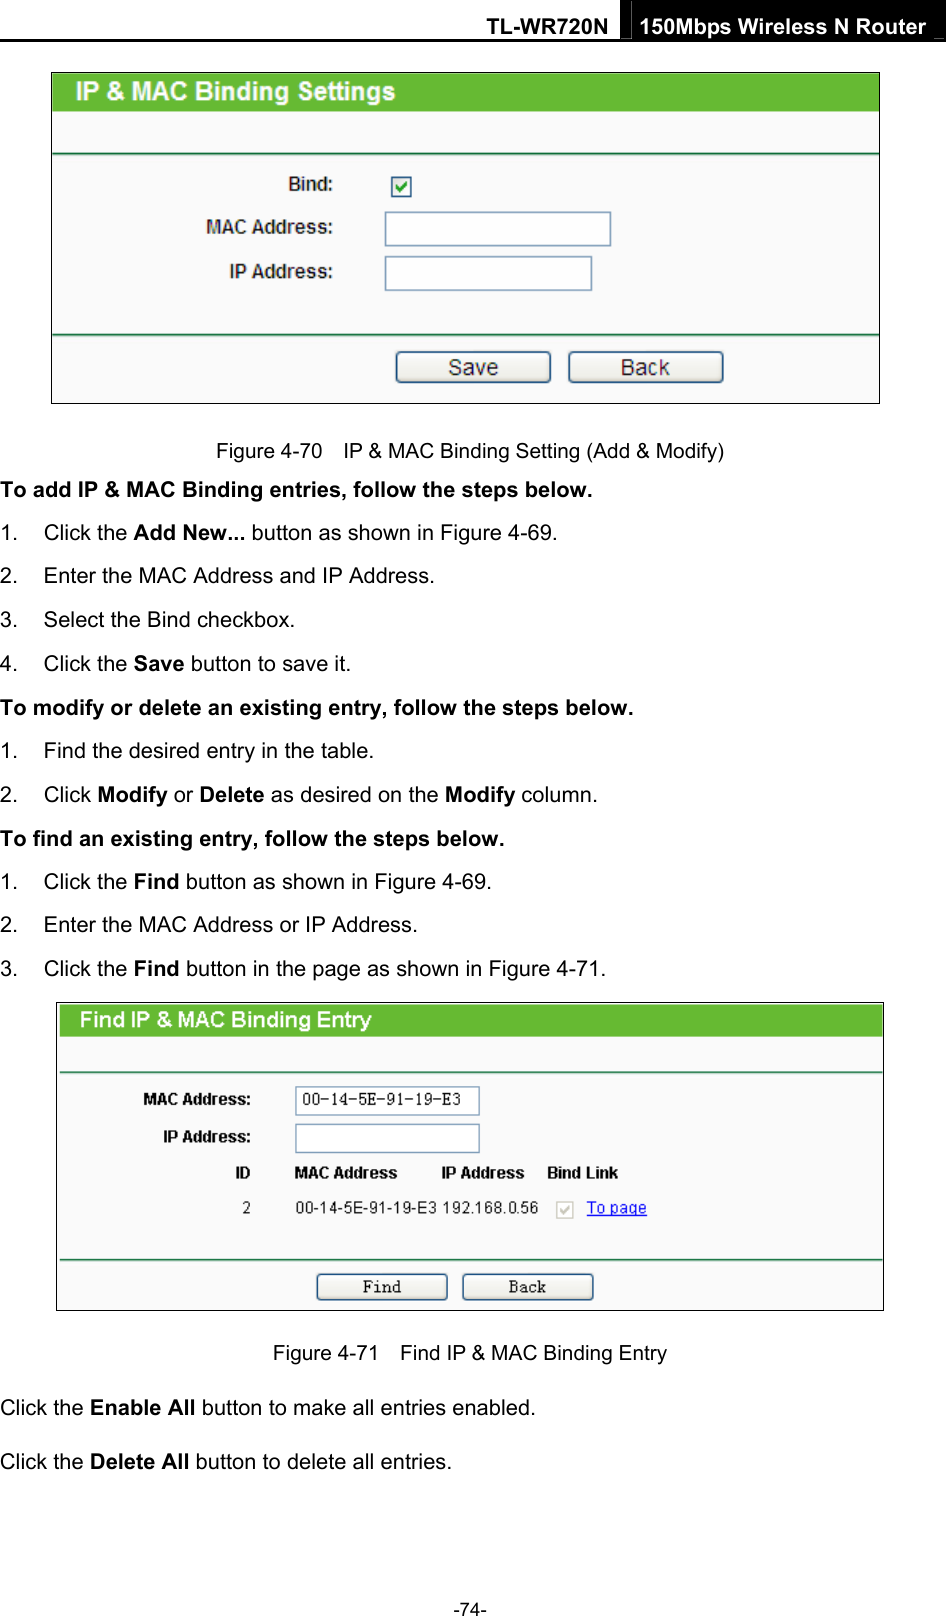 TL-WR720N 150Mbps Wireless N Router  Figure 4-70    IP &amp; MAC Binding Setting (Add &amp; Modify) To add IP &amp; MAC Binding entries, follow the steps below. 1. Click the Add New... button as shown in Figure 4-69.  2.  Enter the MAC Address and IP Address. 3.  Select the Bind checkbox.   4. Click the Save button to save it. To modify or delete an existing entry, follow the steps below. 1.  Find the desired entry in the table.   2. Click Modify or Delete as desired on the Modify column.   To find an existing entry, follow the steps below. 1. Click the Find button as shown in Figure 4-69. 2.  Enter the MAC Address or IP Address. 3. Click the Find button in the page as shown in Figure 4-71.  Figure 4-71    Find IP &amp; MAC Binding Entry Click the Enable All button to make all entries enabled. Click the Delete All button to delete all entries. -74- 